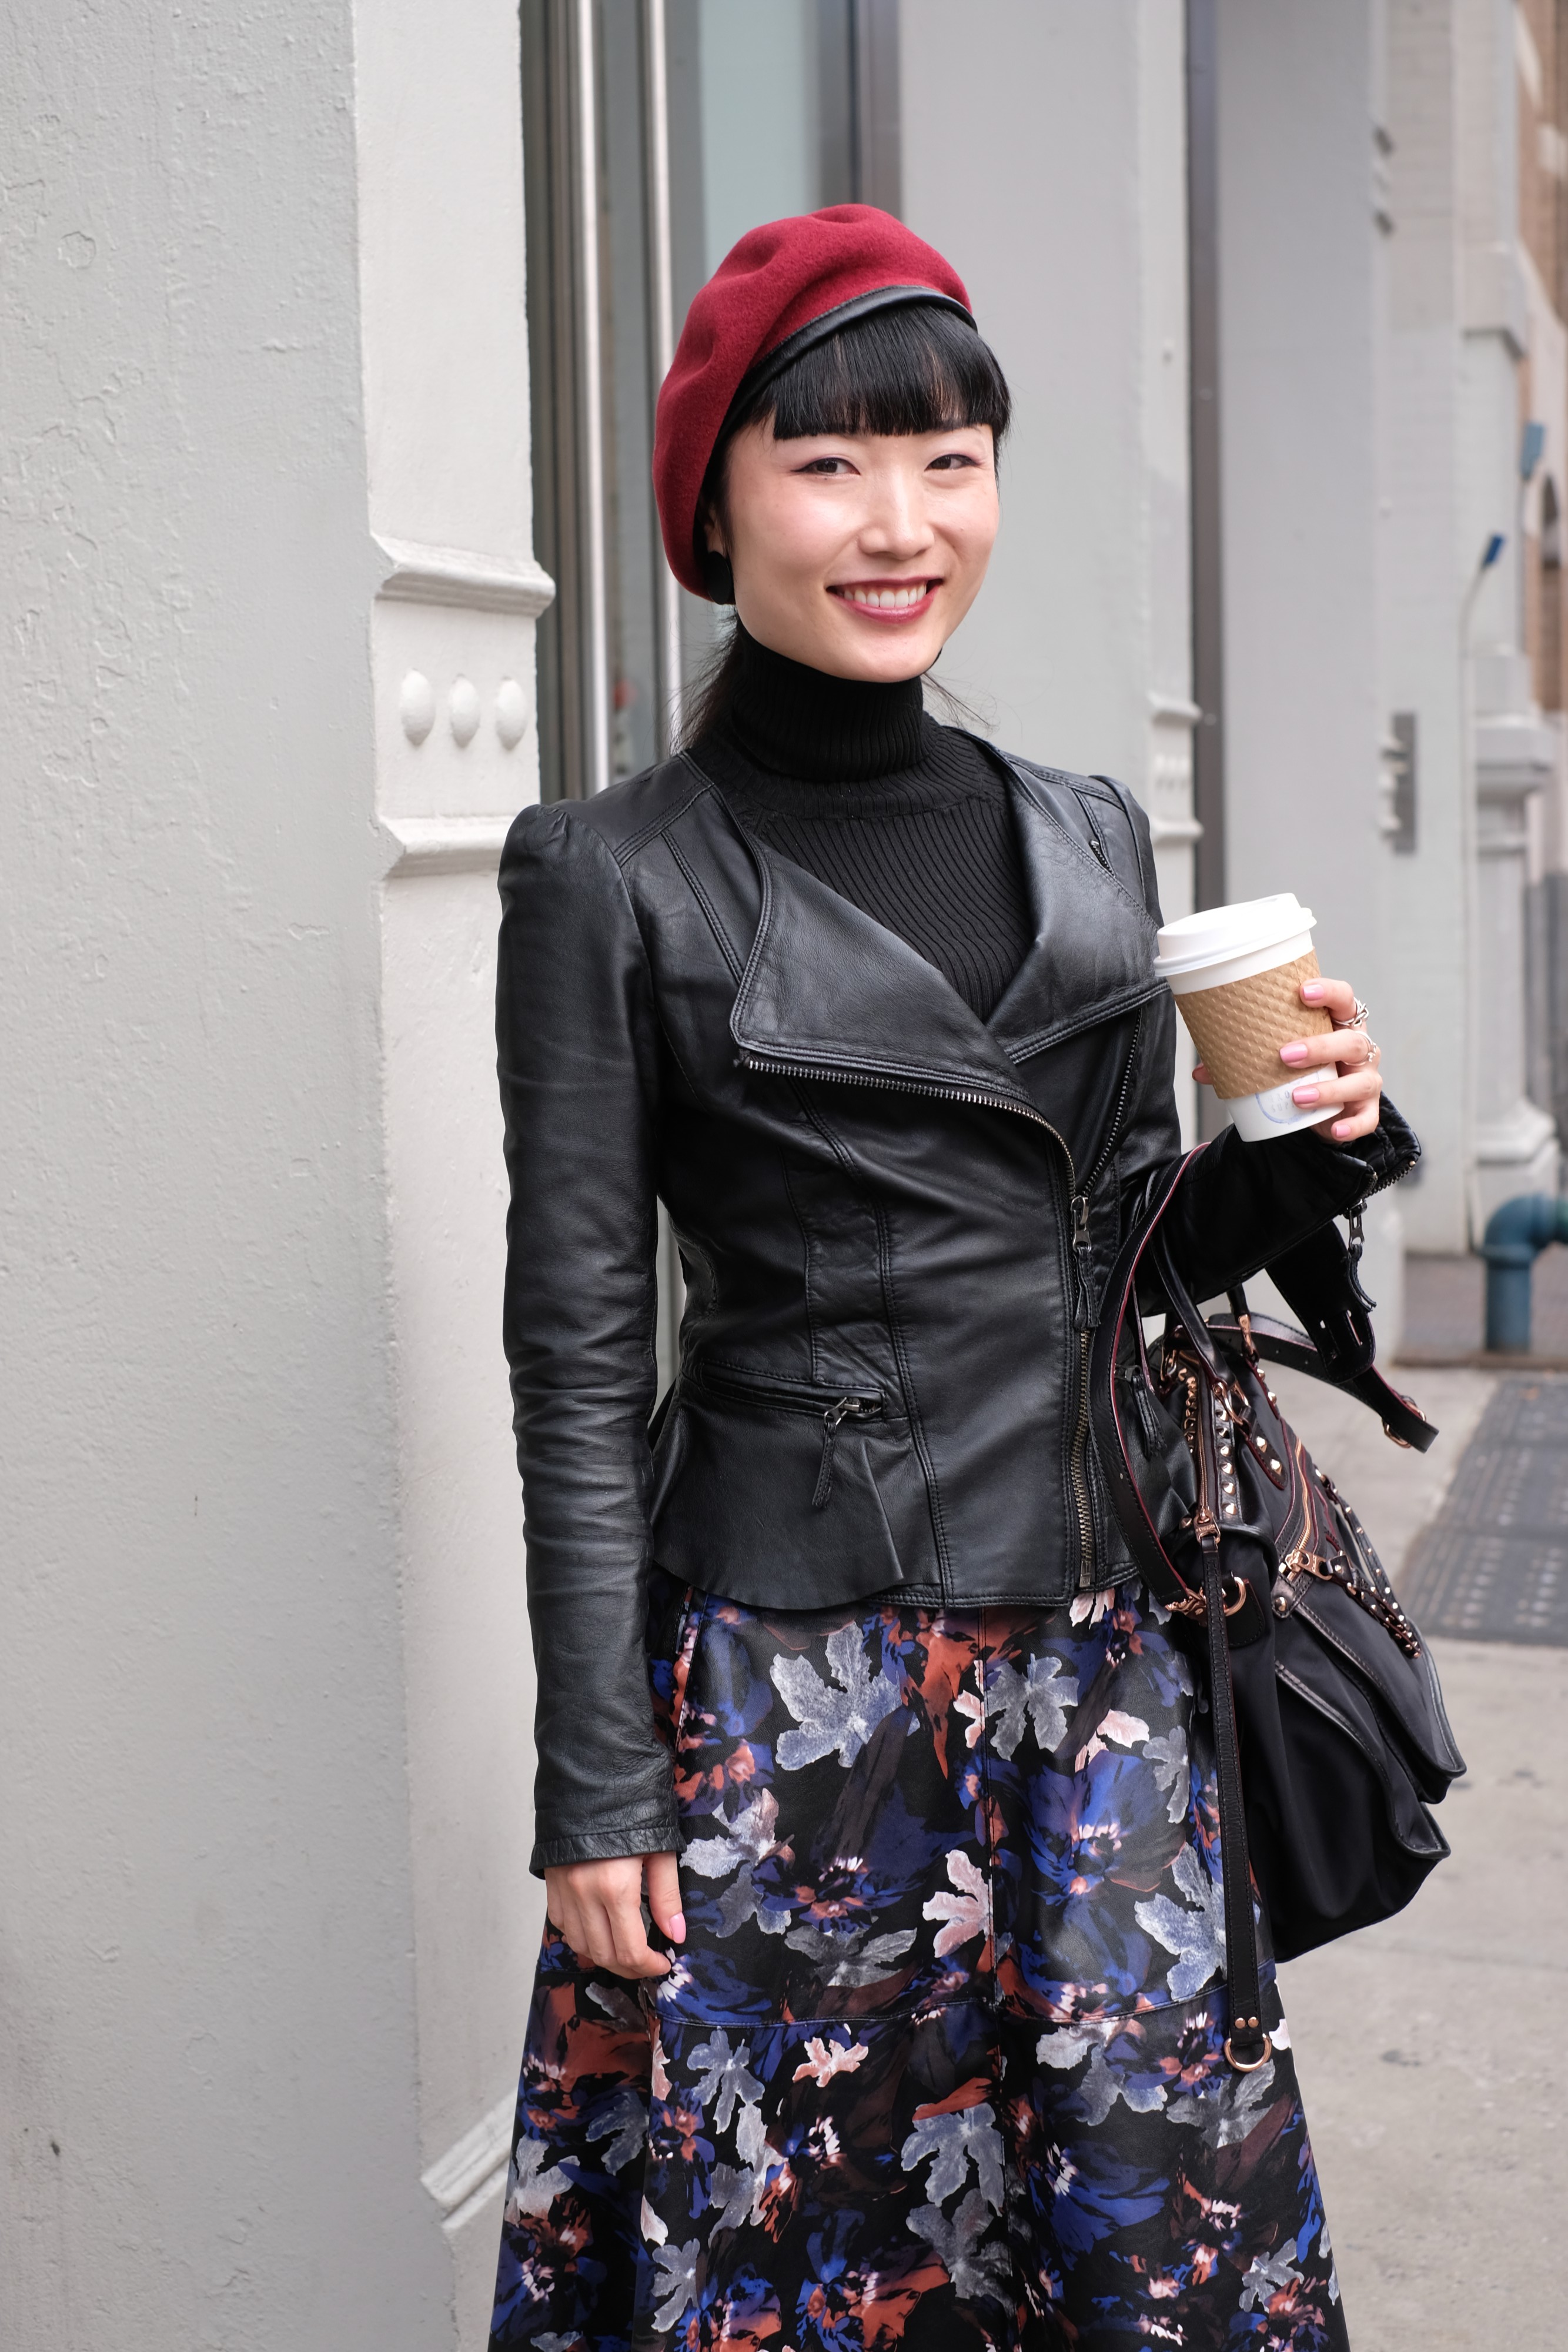 Asian girl in floral dress and black jacket